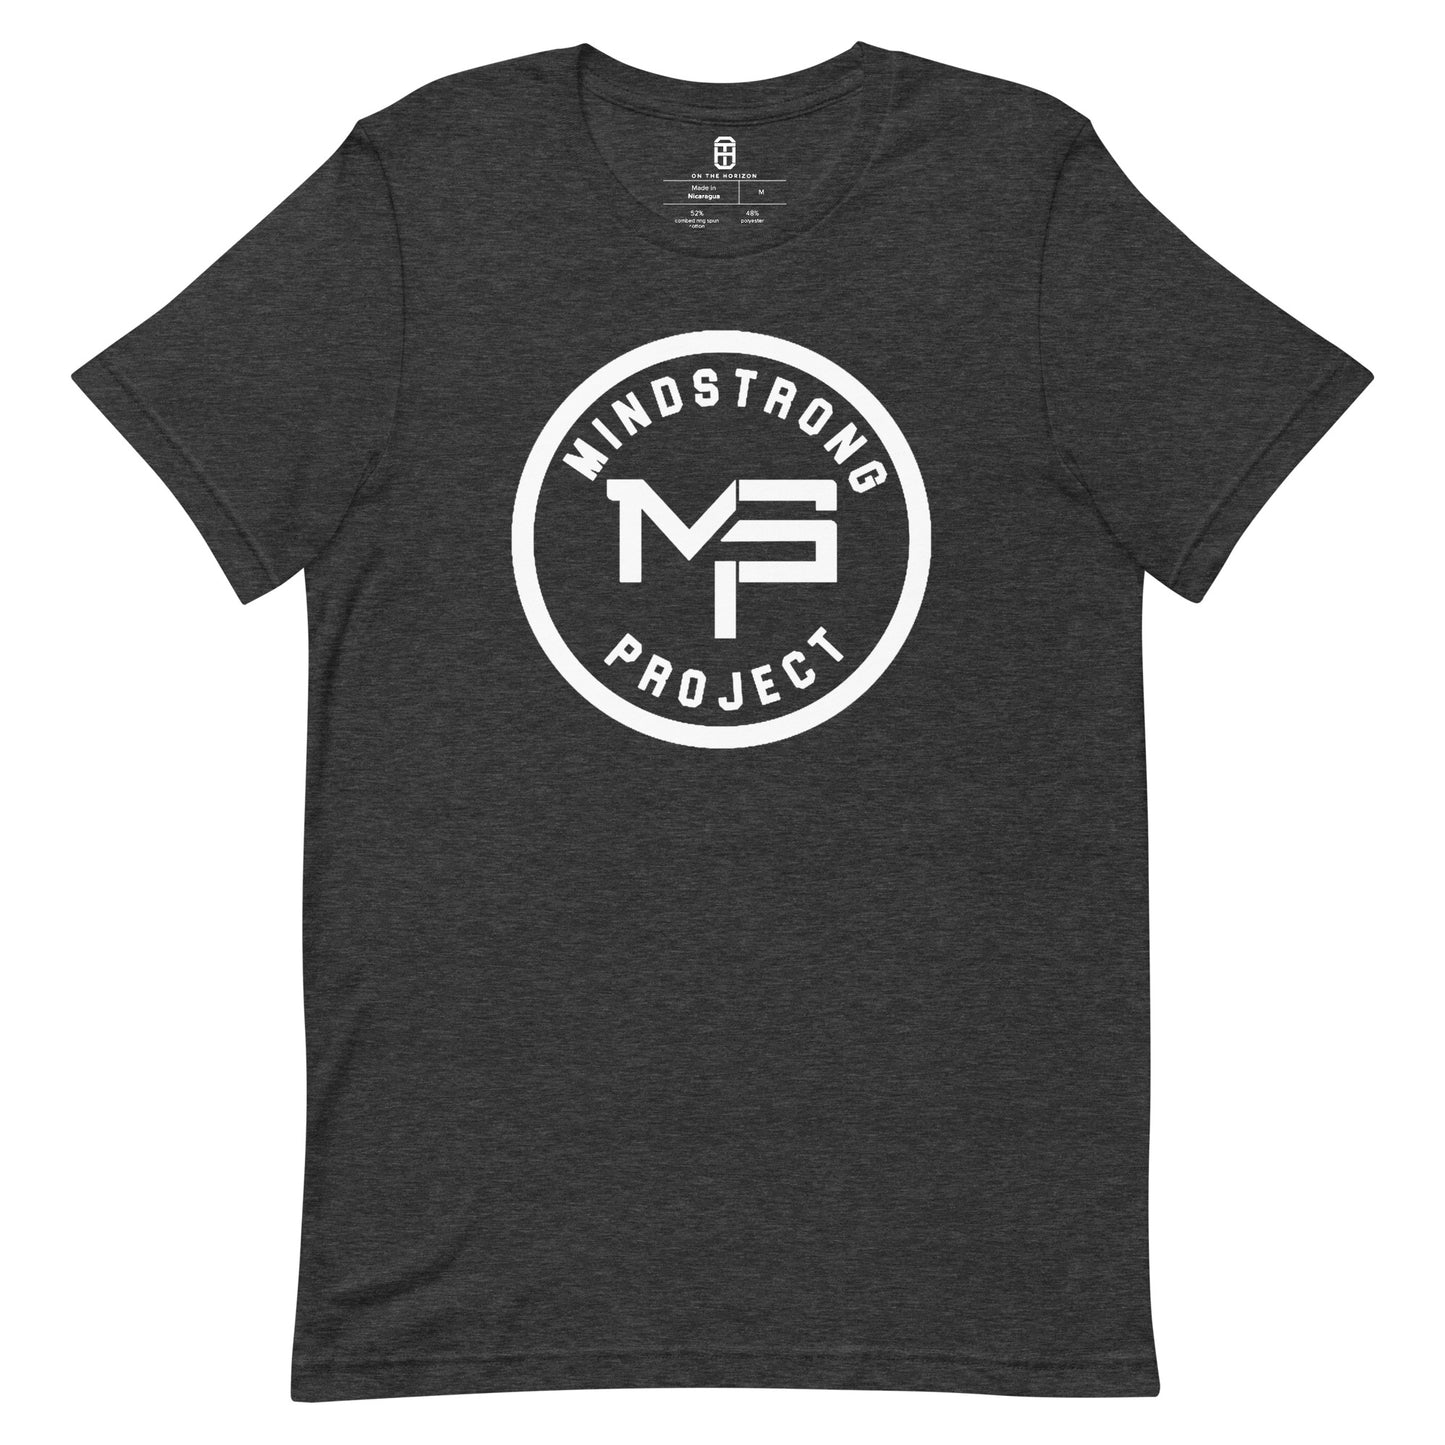 THE MINDSTRONG PROJECT LARGE LOGO T-SHIRT (MORE COLORS)